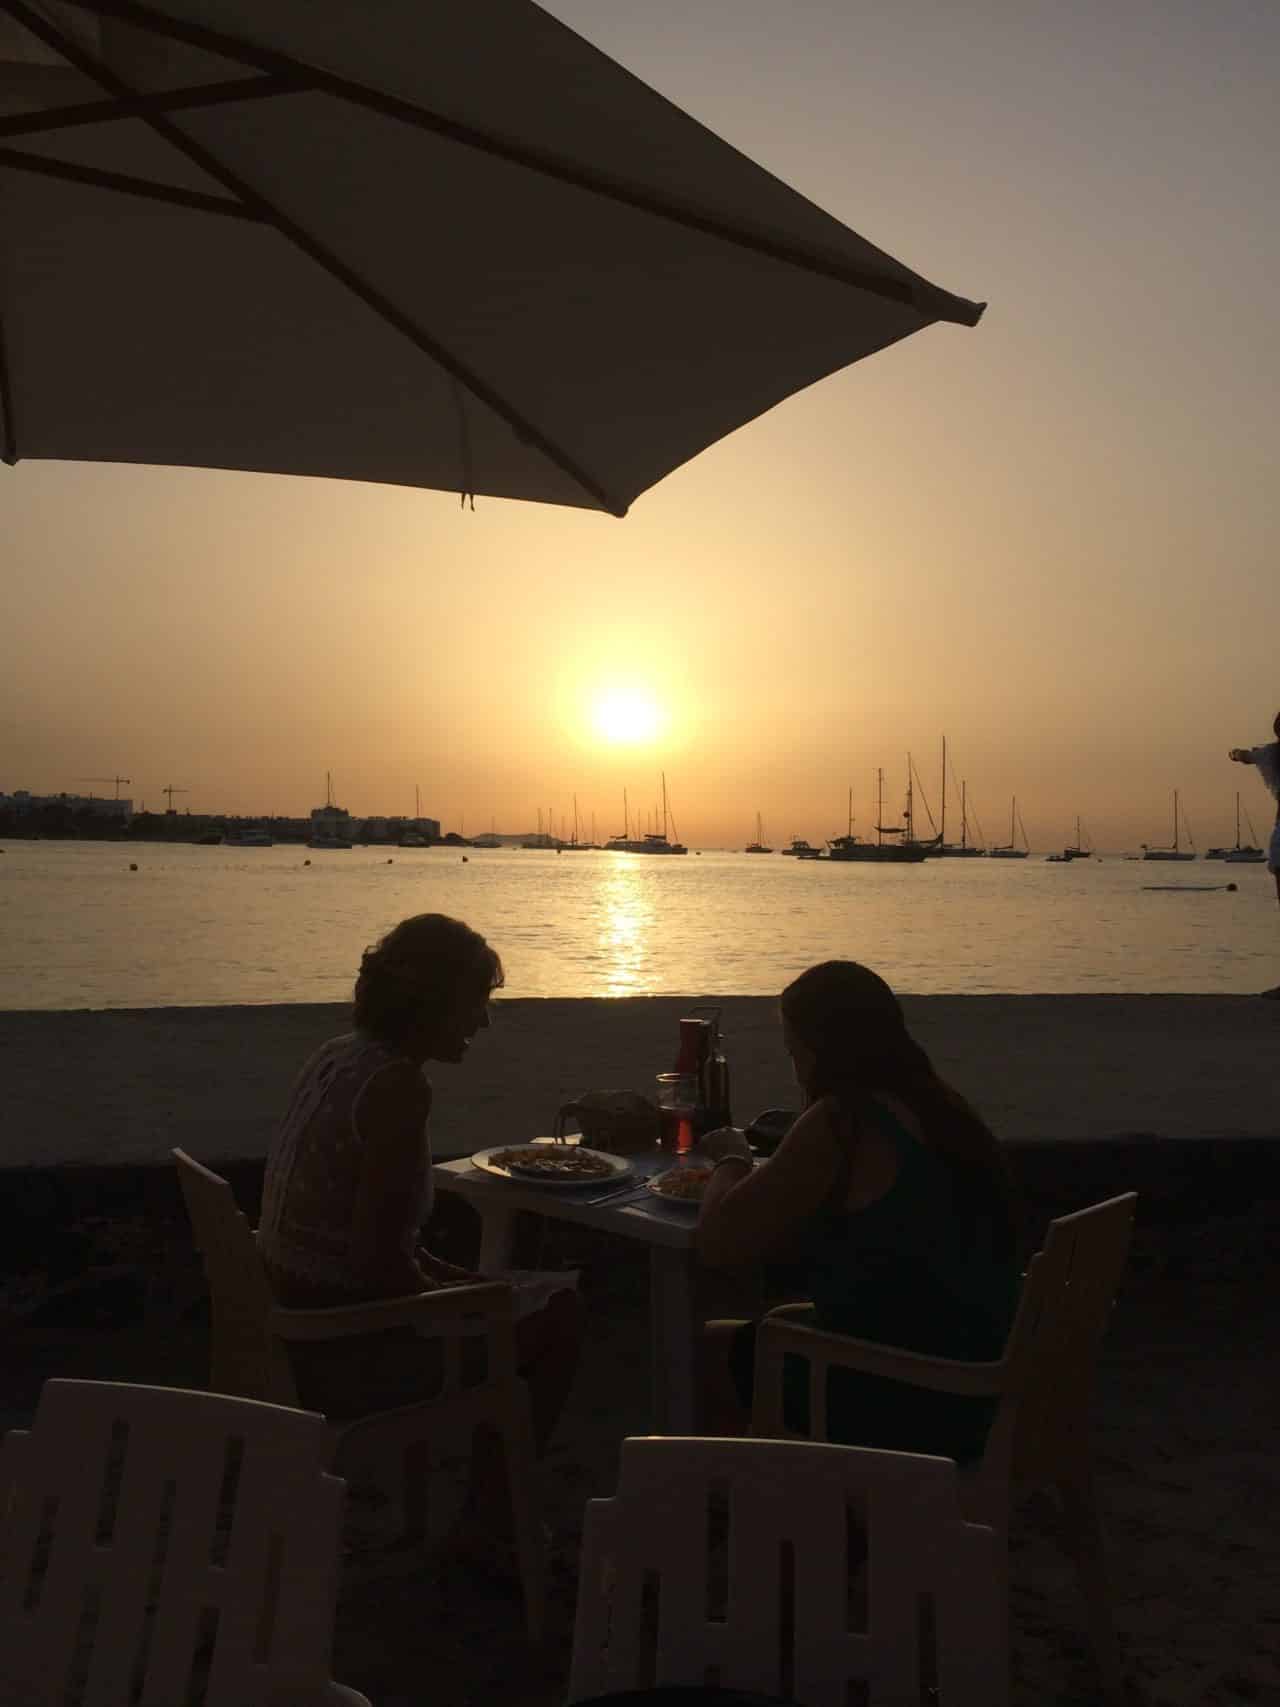 Sunset Dinner By The Sea With Boats And Umbrella